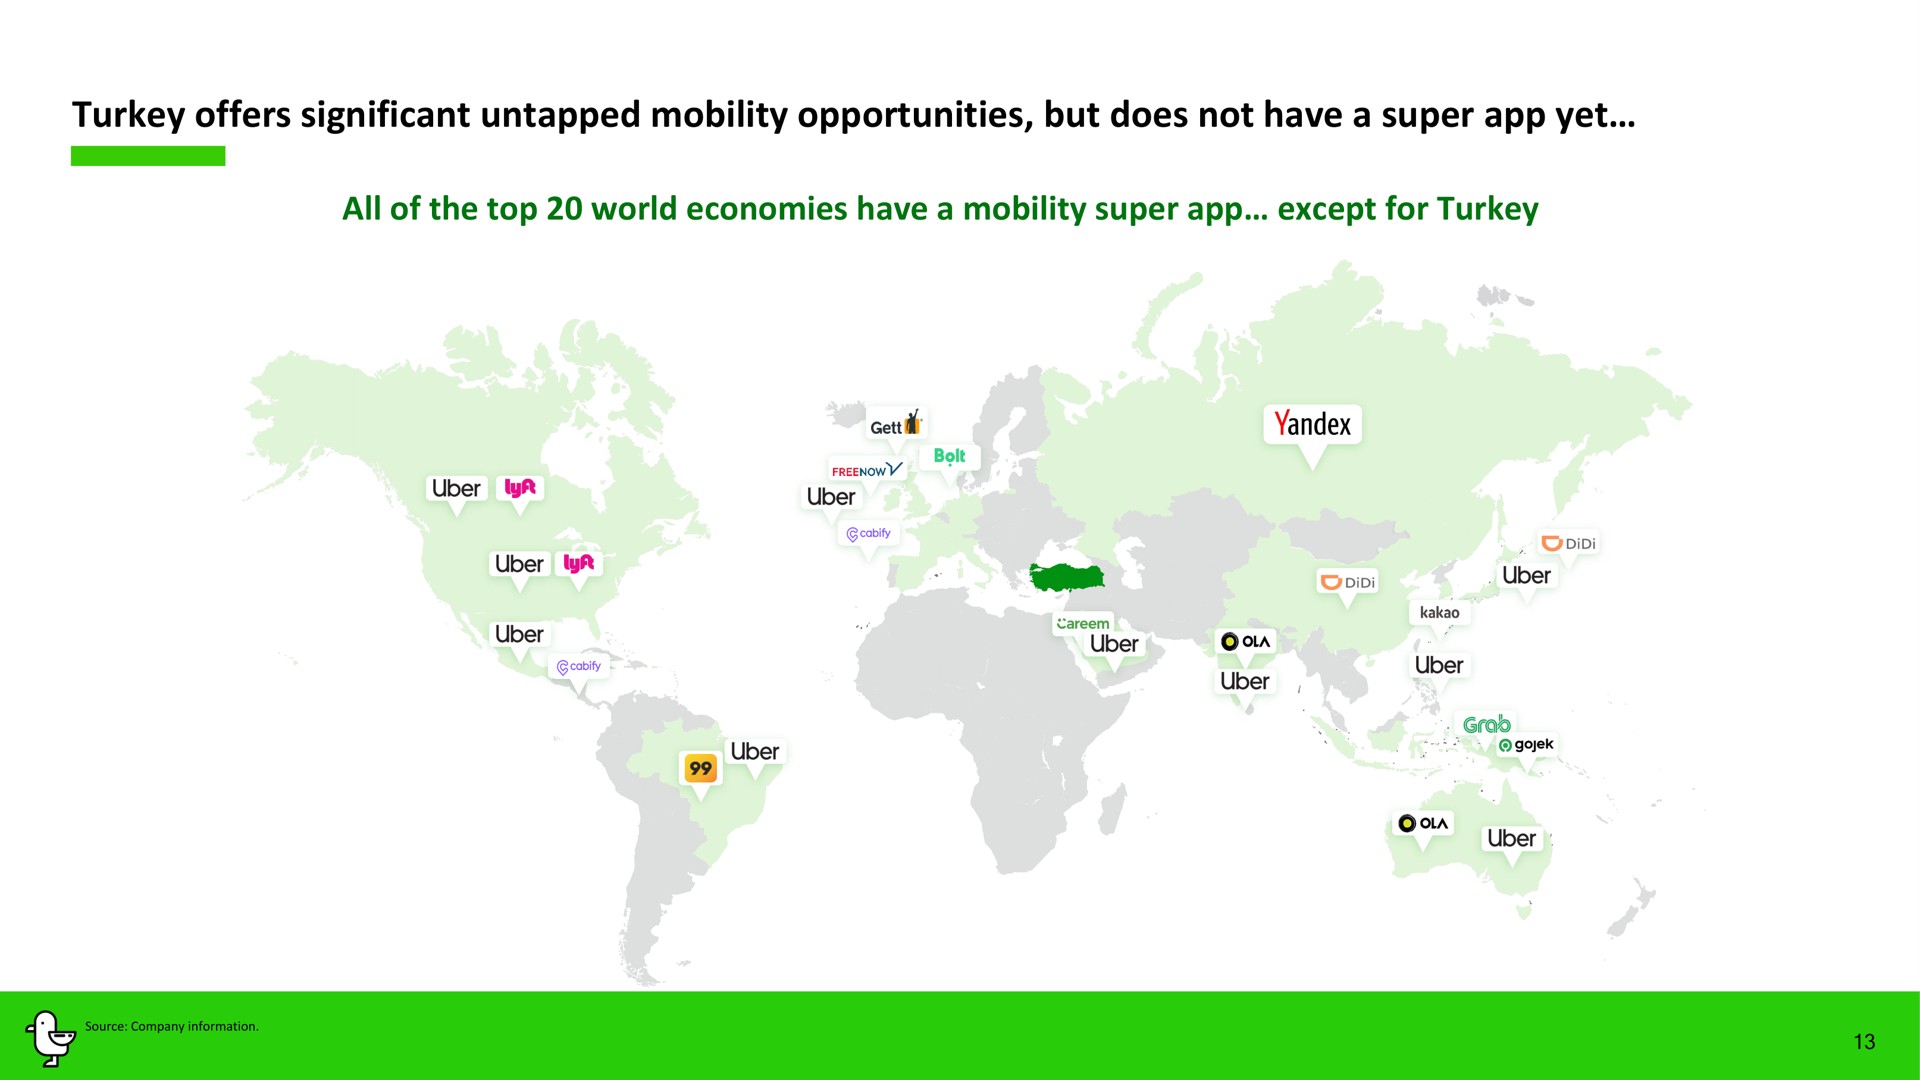 turkey offers significant untapped mobility opportunities but does not have a super yet all of the top world economies have a mobility super except for turkey | Marti